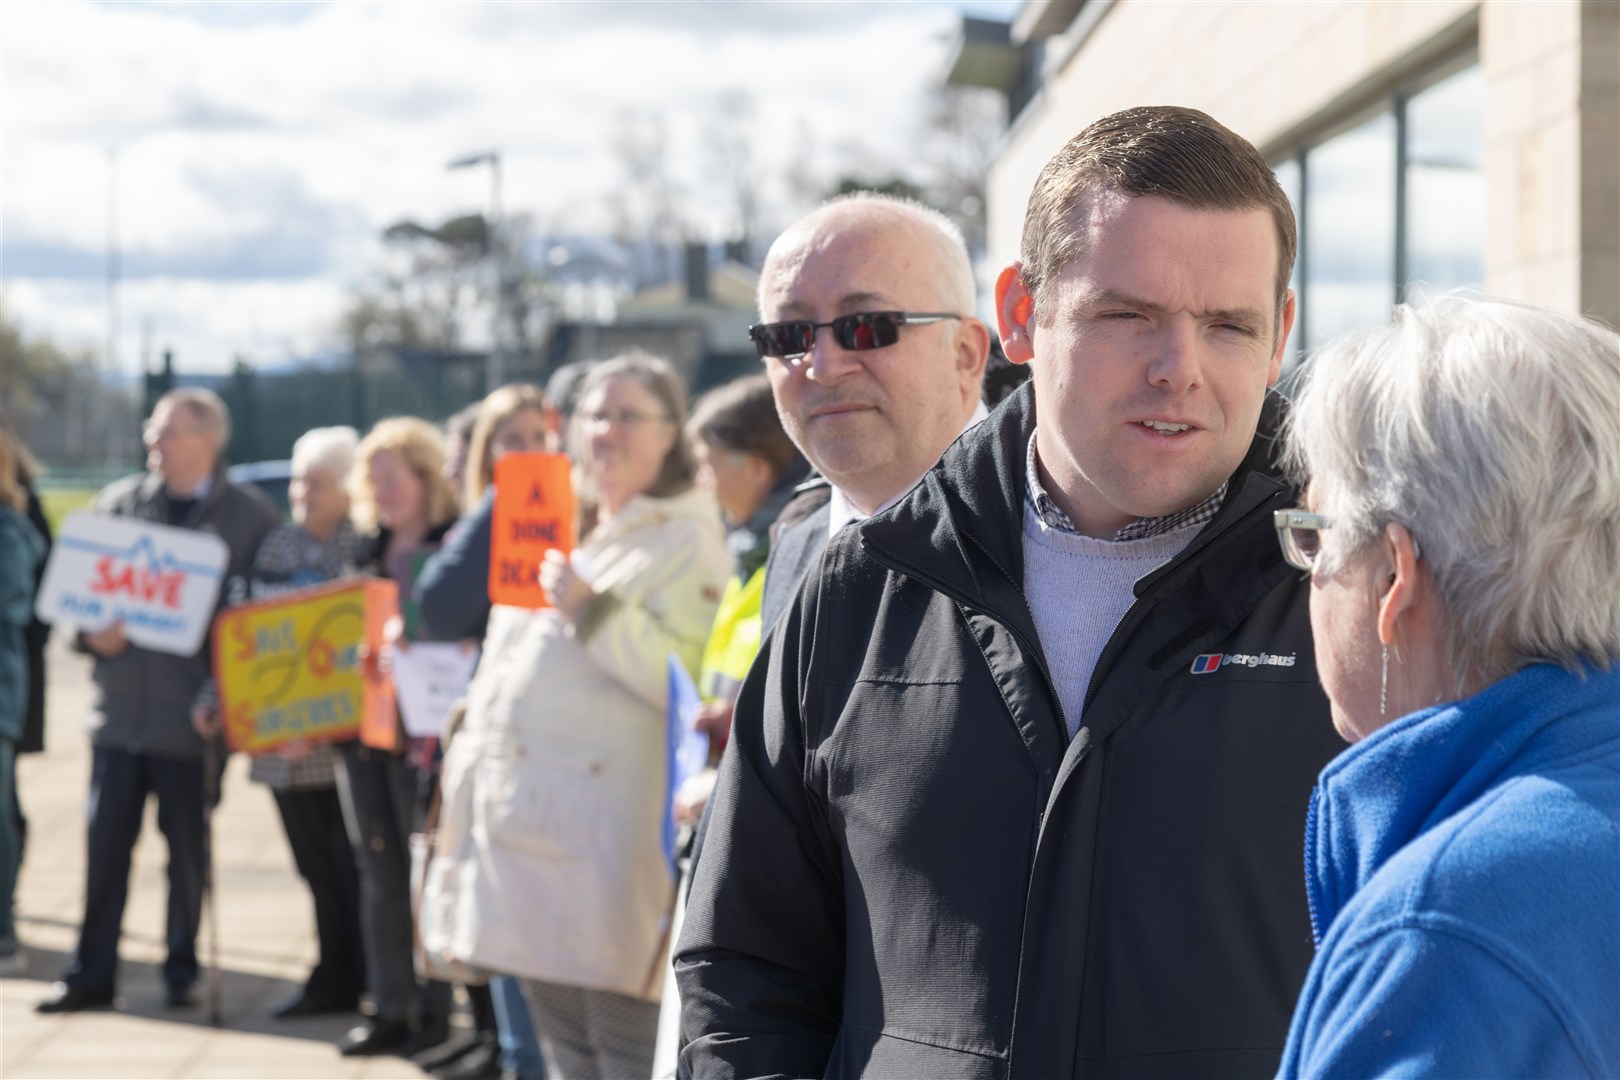 Moray MP Douglas Ross talking to the "Save Our Surgeries" campaign group who were protesting outside the Moray Coast Health Centre in Lossiemouth to save both Hopeman and Burghead GP surgeries. ..Picture: Beth Taylor.